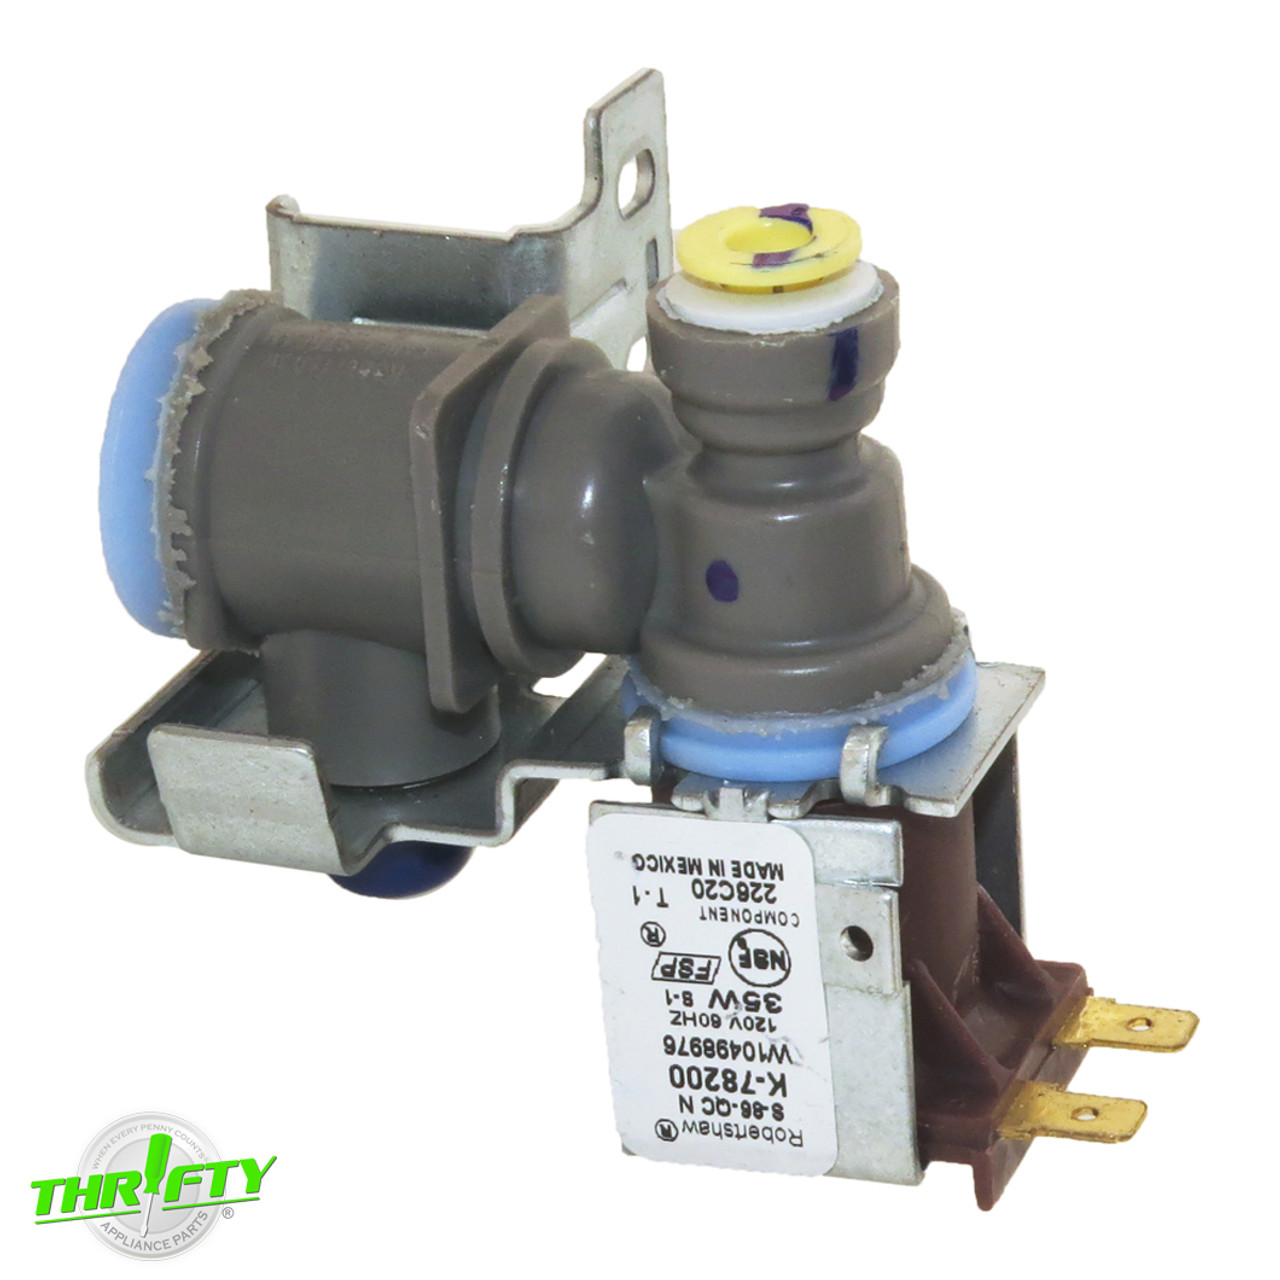 W Refrigerator Water Inlet Valve For Whirlpool Thrifty Appliance Parts